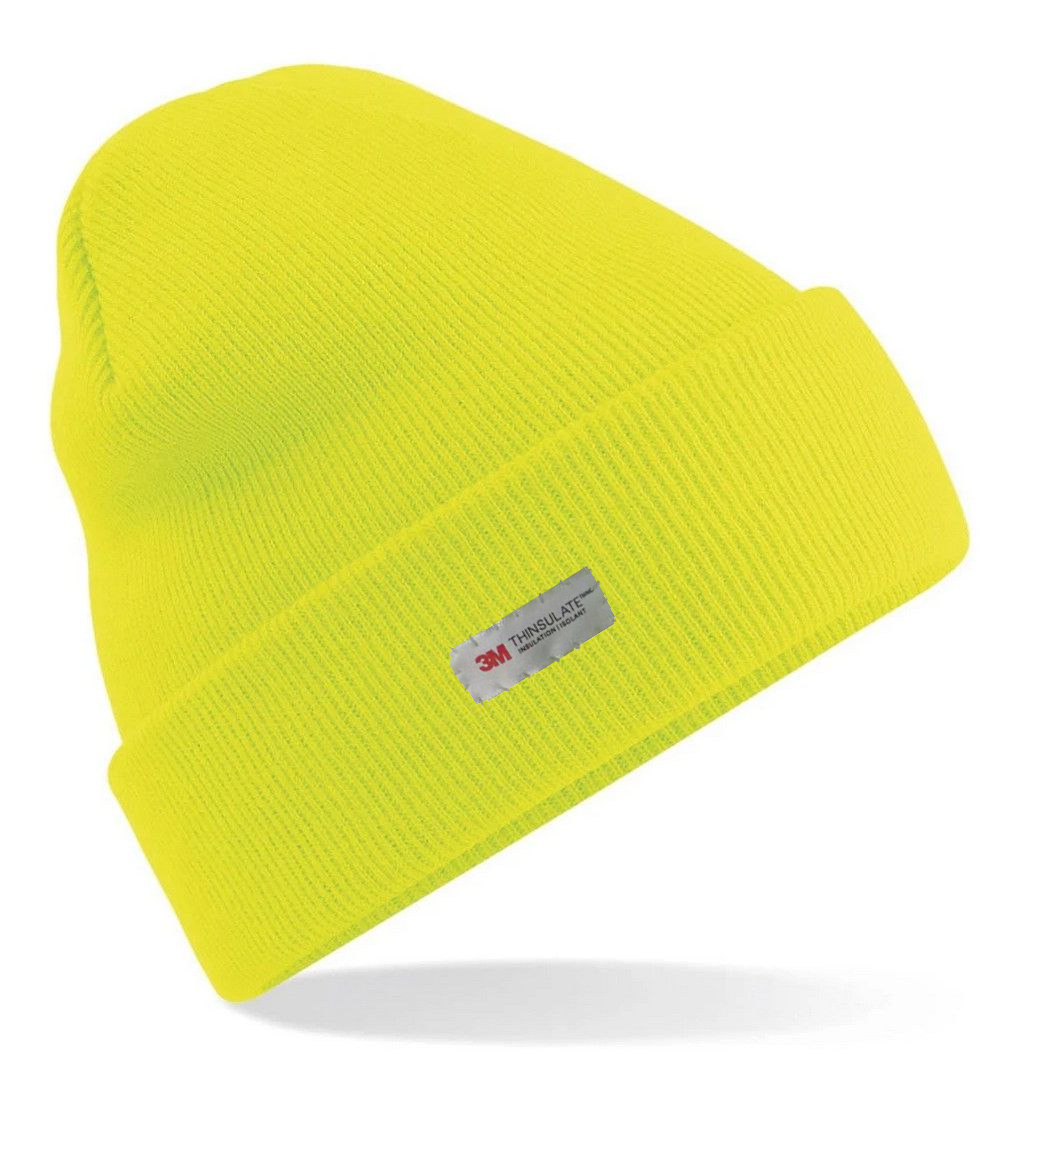 Pull On Beanie Hat Thermal Work High Visibility - Neon Yellow